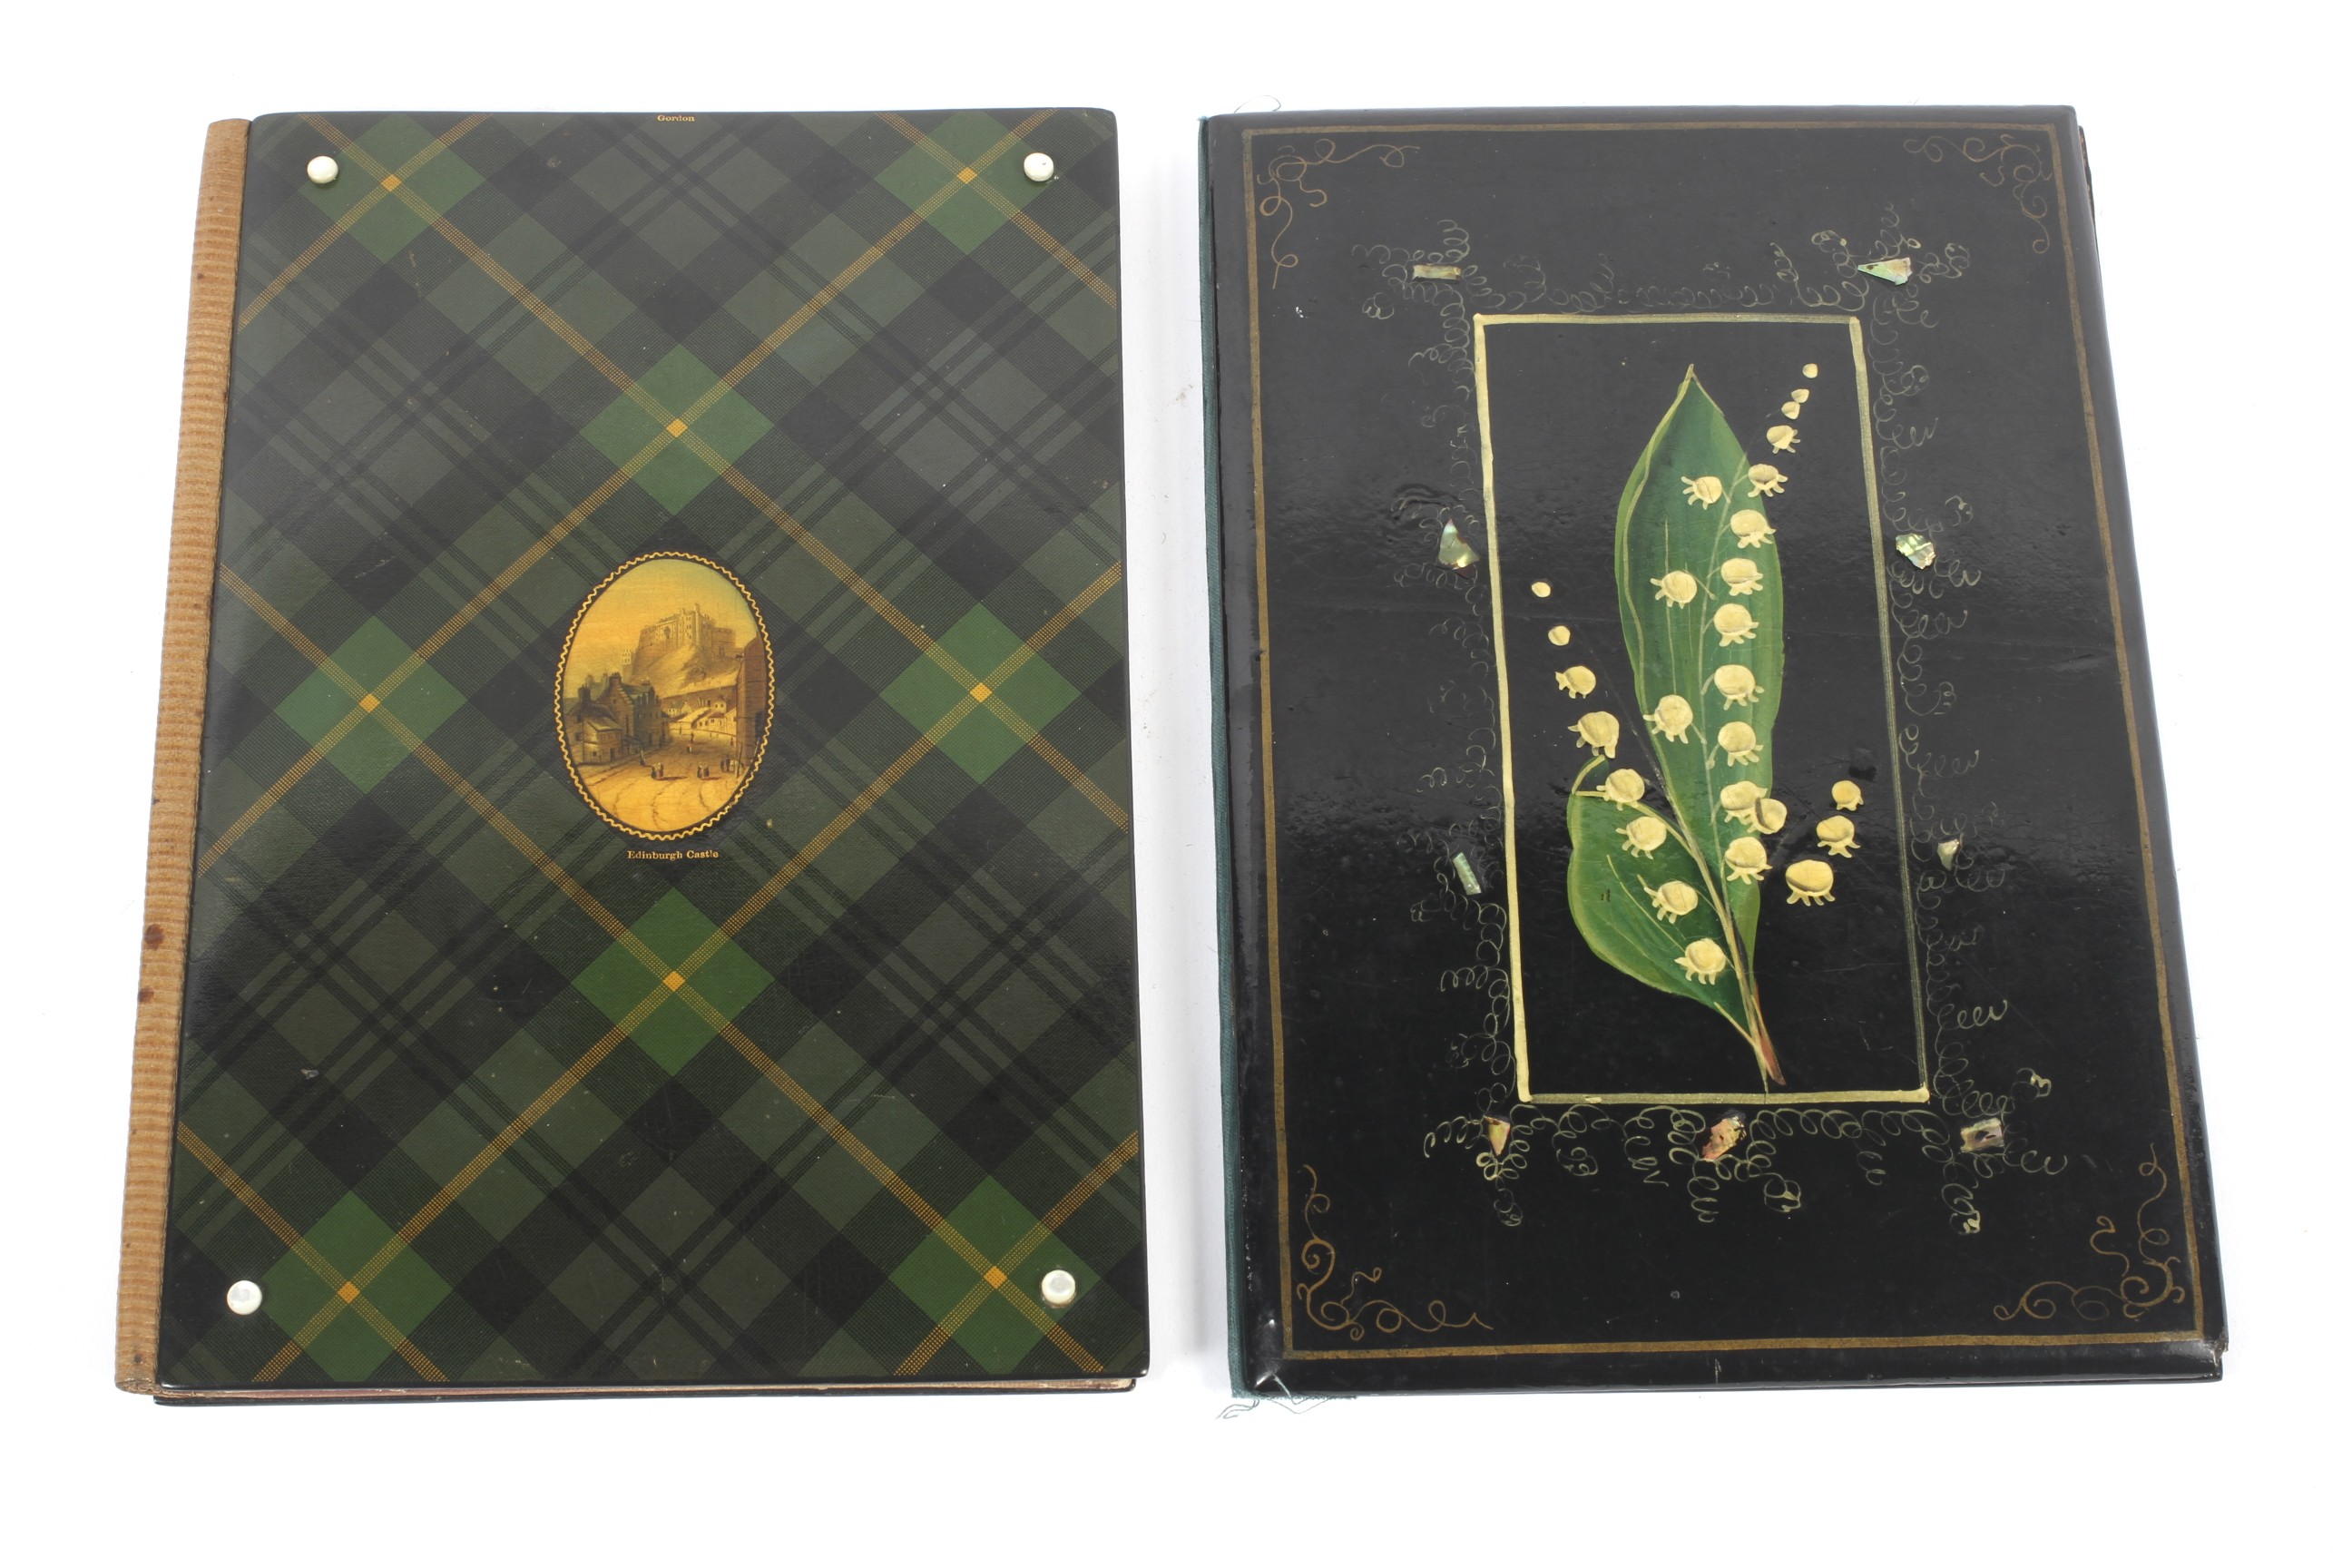 A 19th century Mauchlin Ware Tartan covered note book.